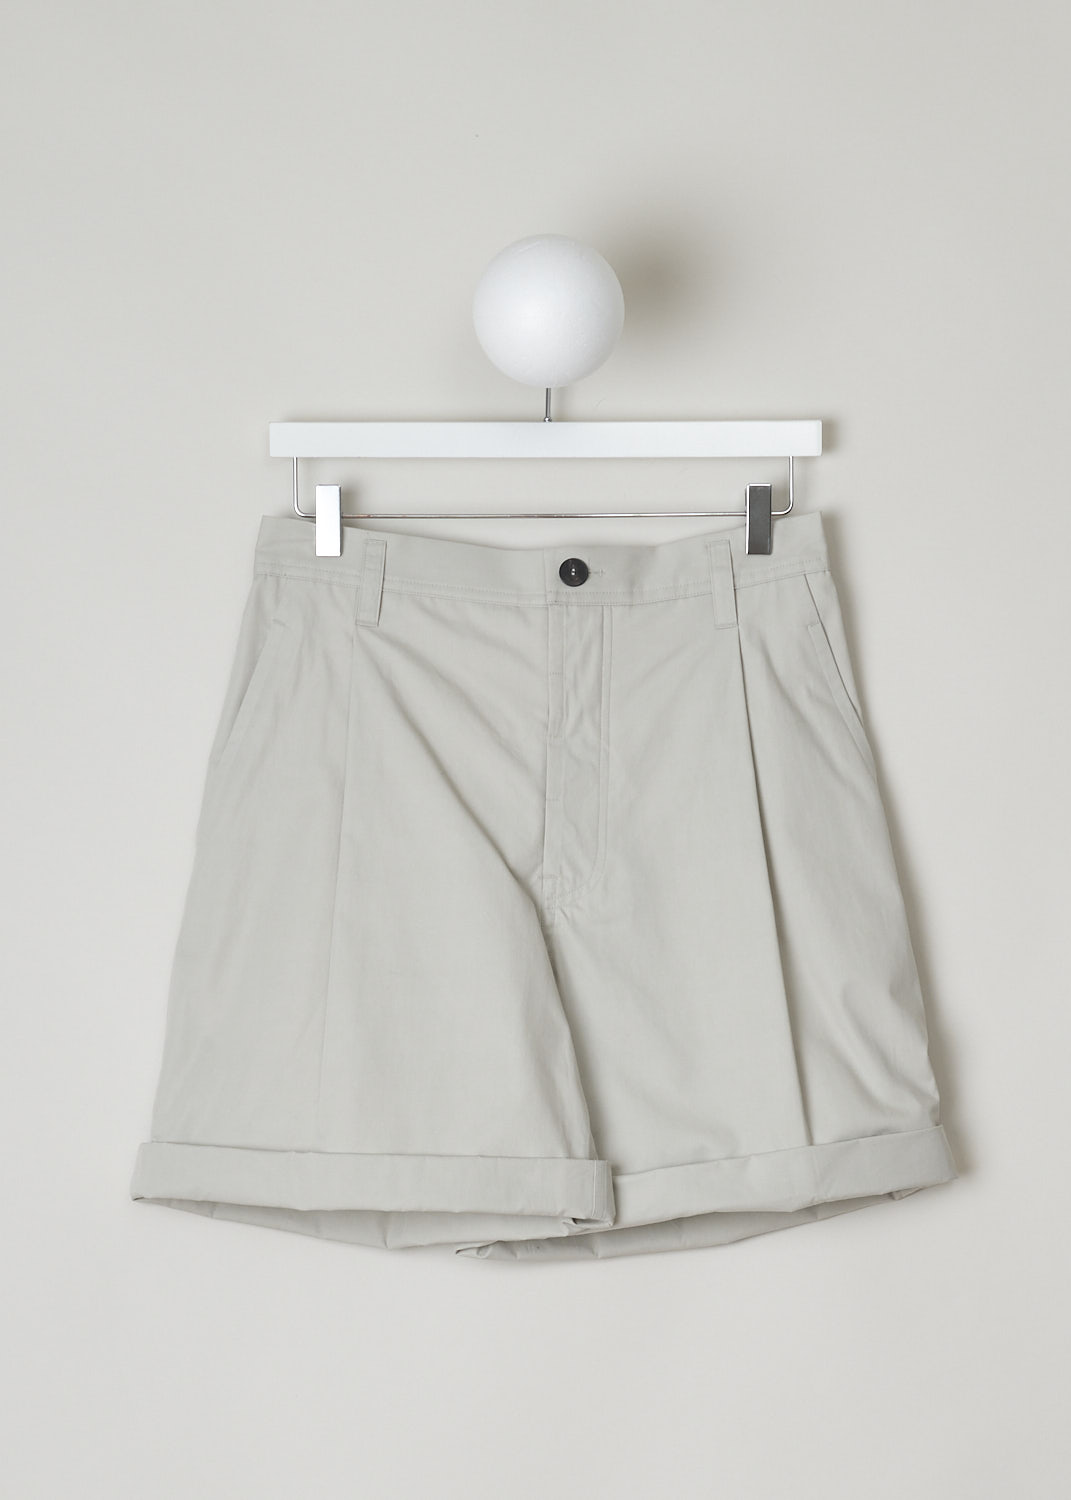 SOFIE Dâ€™HOORE, GREY HIGH-WAISTED SHORTS, PENNY_COSY_STONE, Grey, Front, These grey high-waisted shorts have belt loops and a concealed front button closure, with a single button visible on the waistband. These shorts have slanted pockets in the front and a single welt pocket in the back. The pant legs have a single box pleat and have a folded hem that can be unfolded.   
